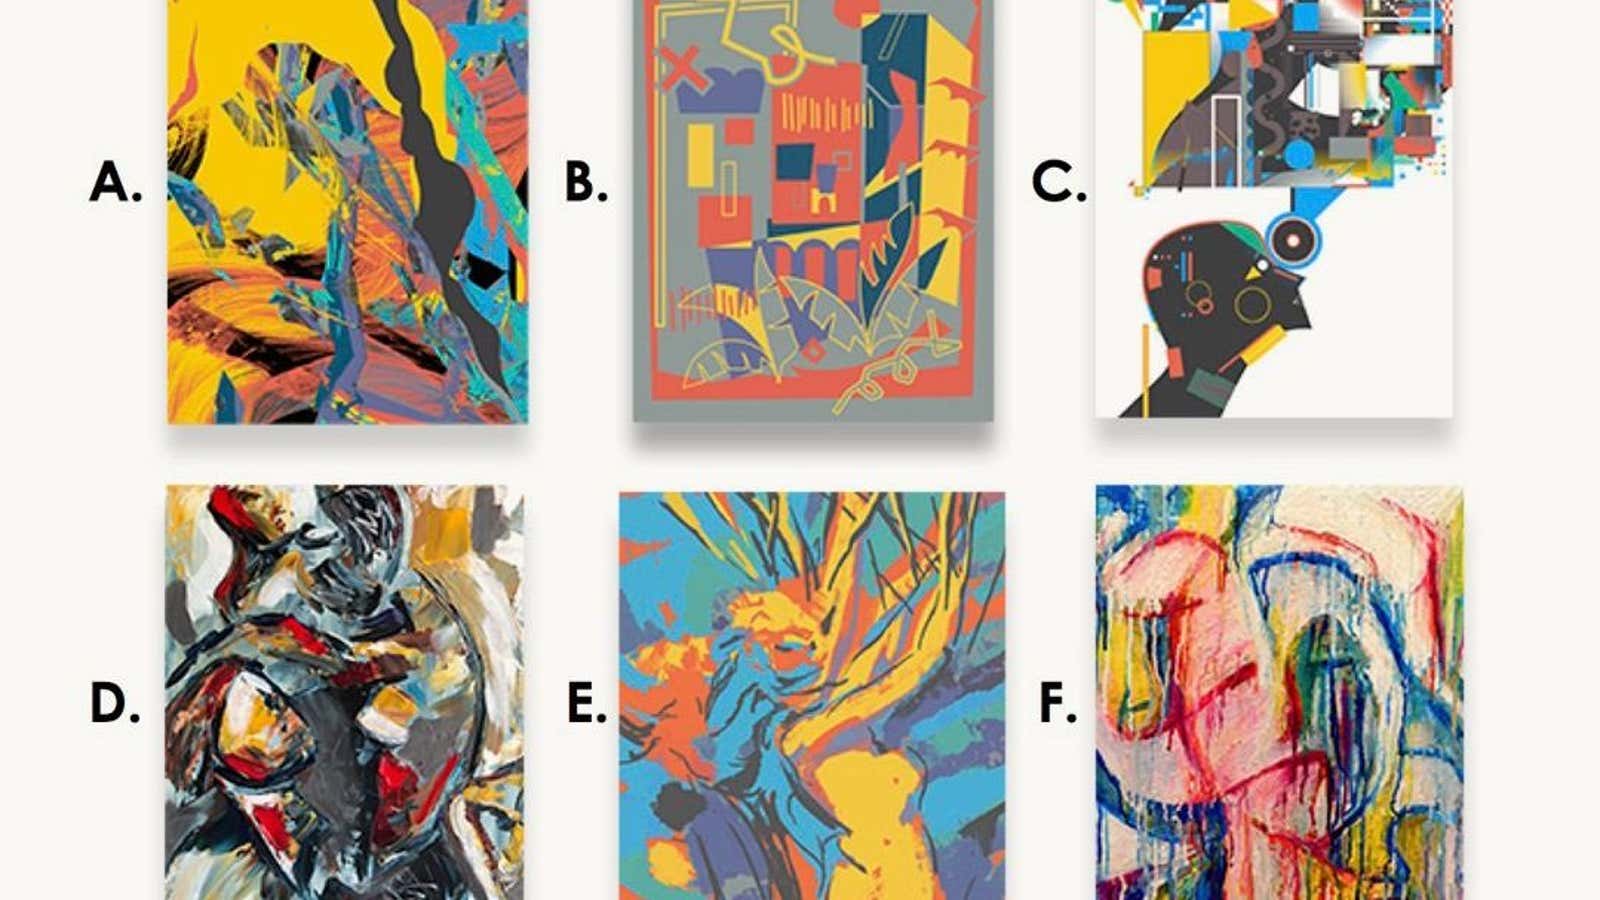 Can Artificial Intelligence Guess What You Have Drawn?